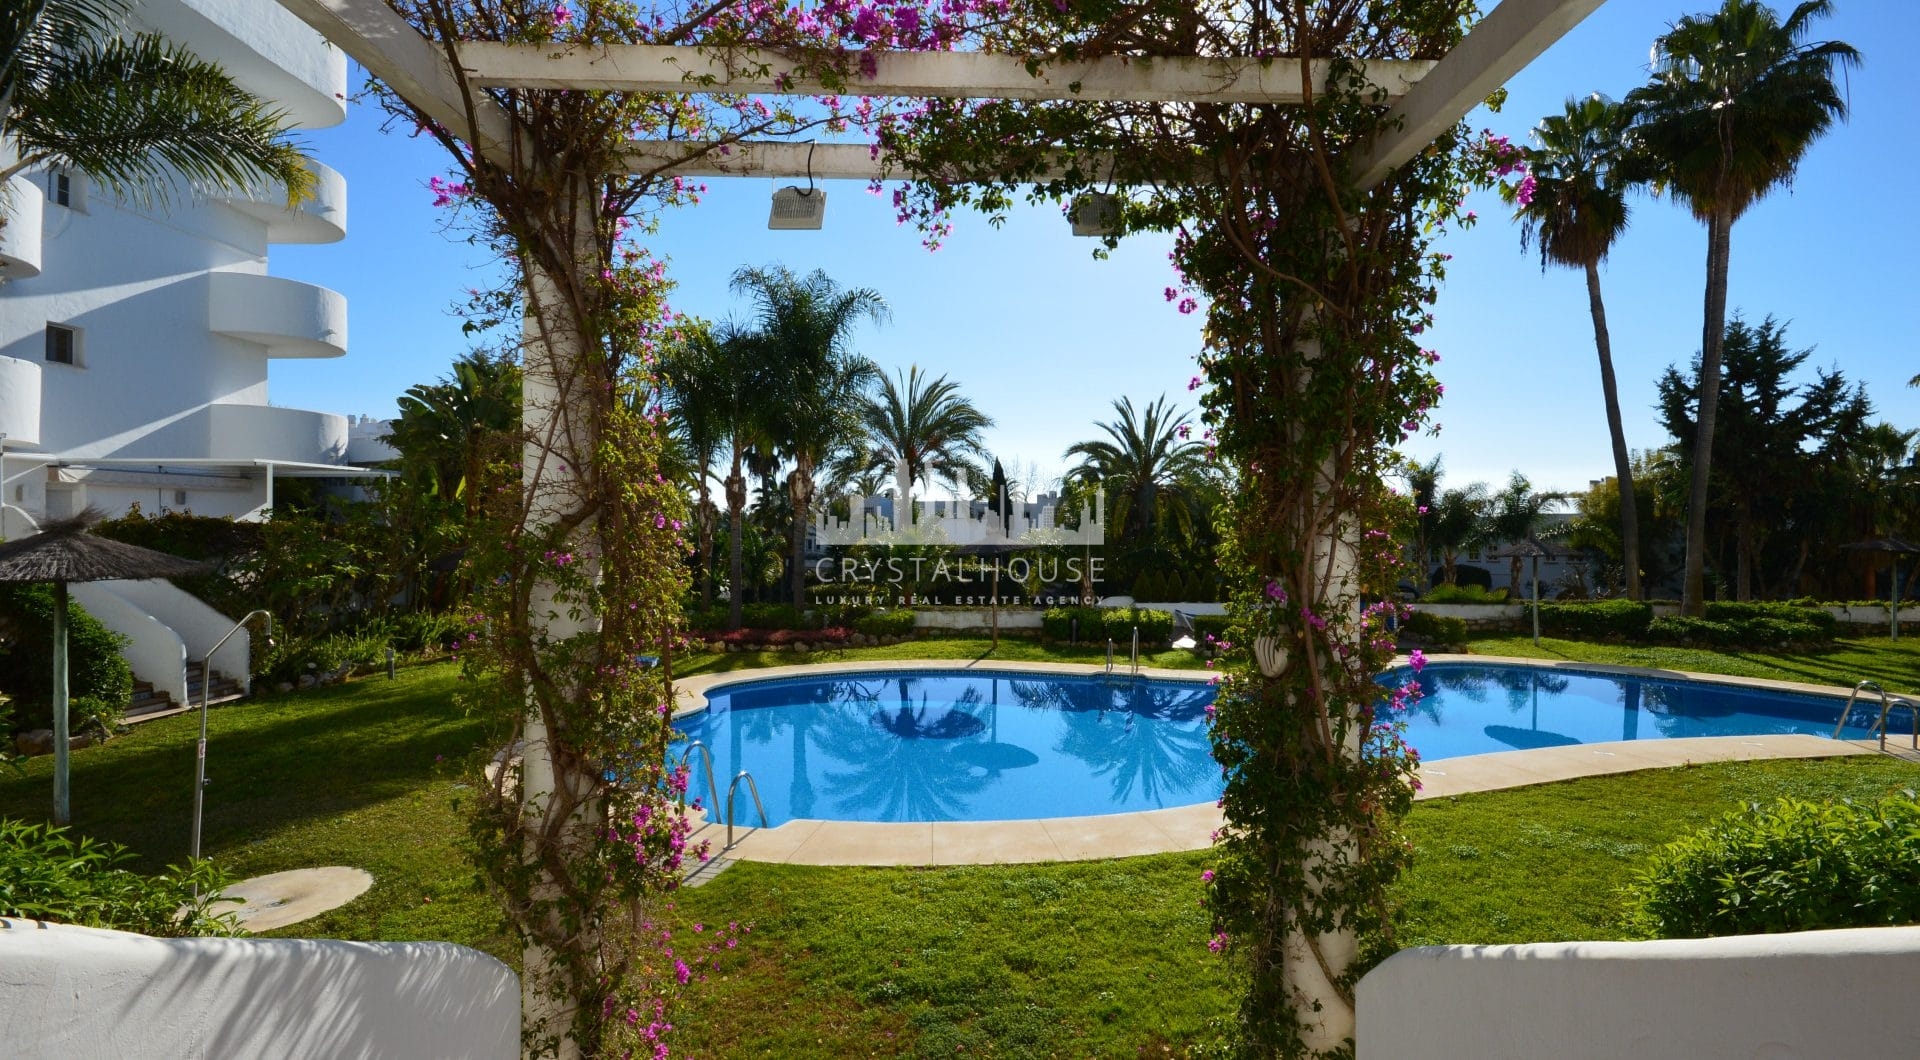 Superb three bedroom, duplex penthouse in the well-known i gated community. Marbella Real z widokami morskimi!